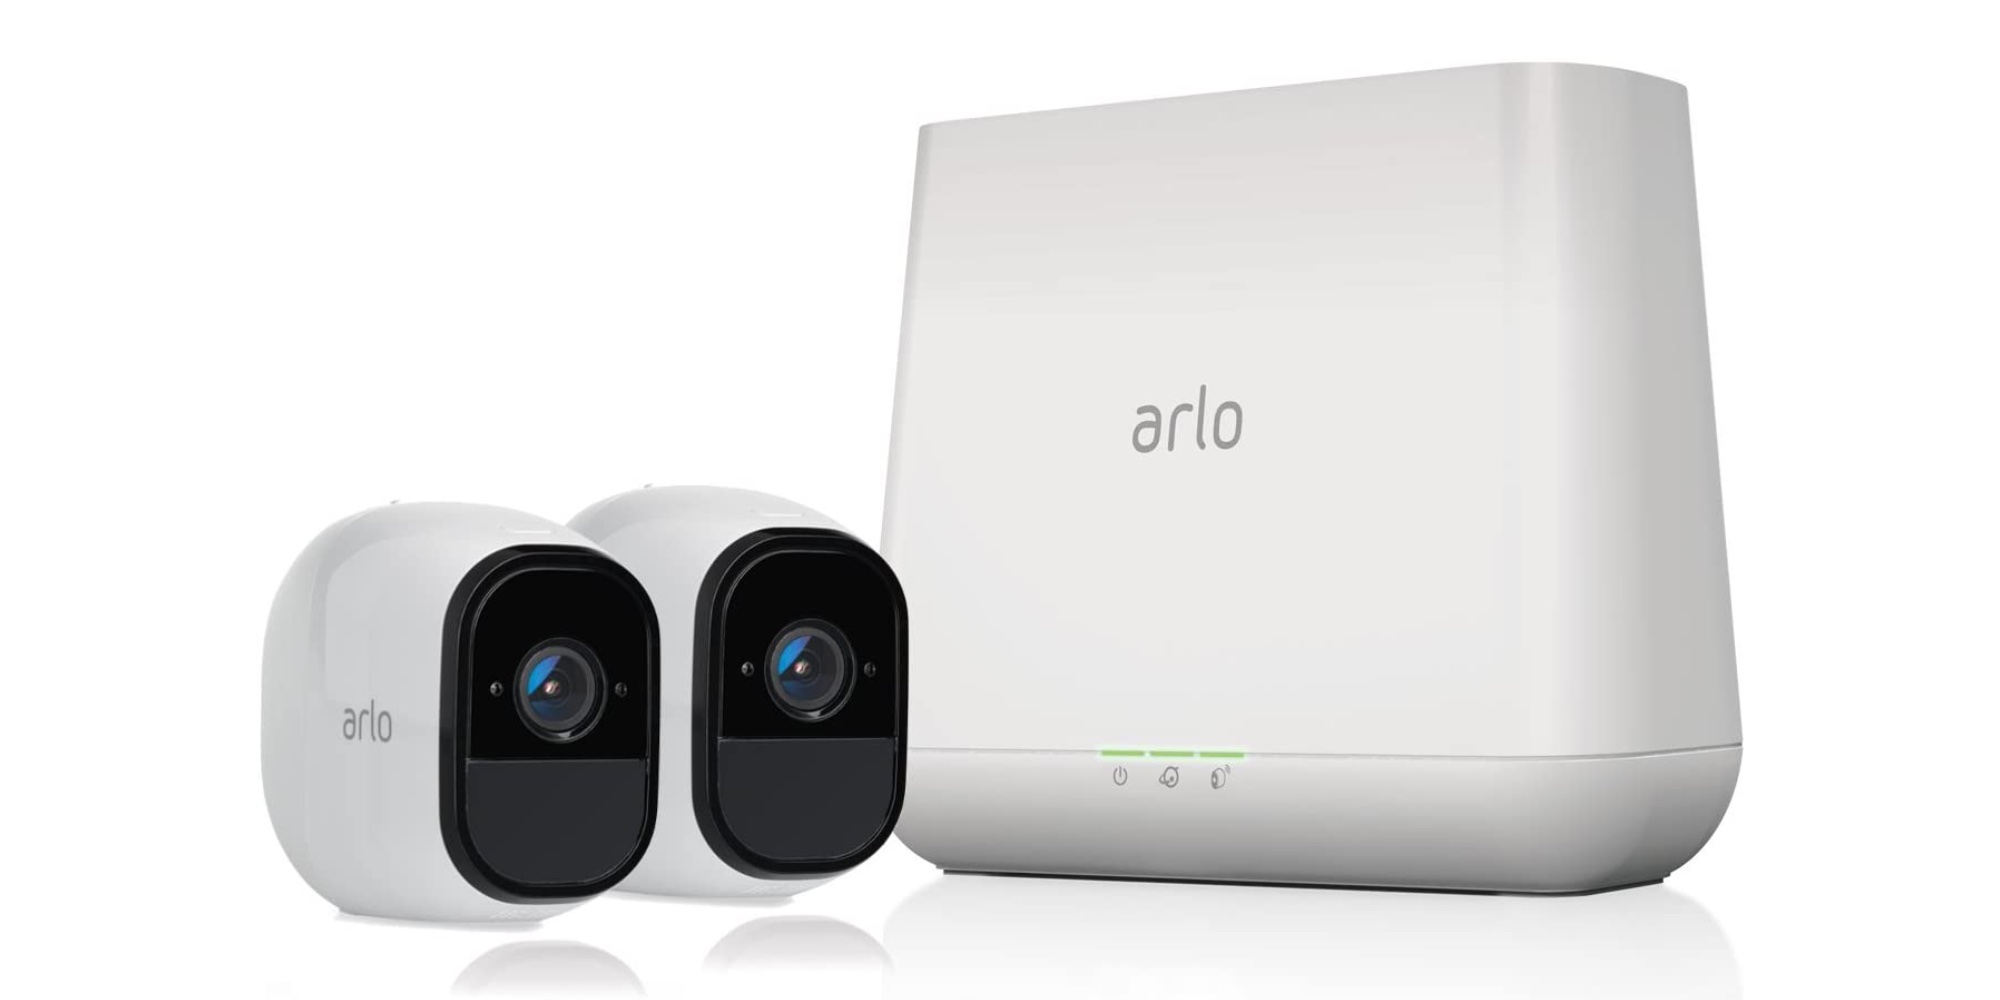 Bring Arlo's Pro 2 Camera System into your HomeKit setup for 200 (Save 50) 9to5Toys